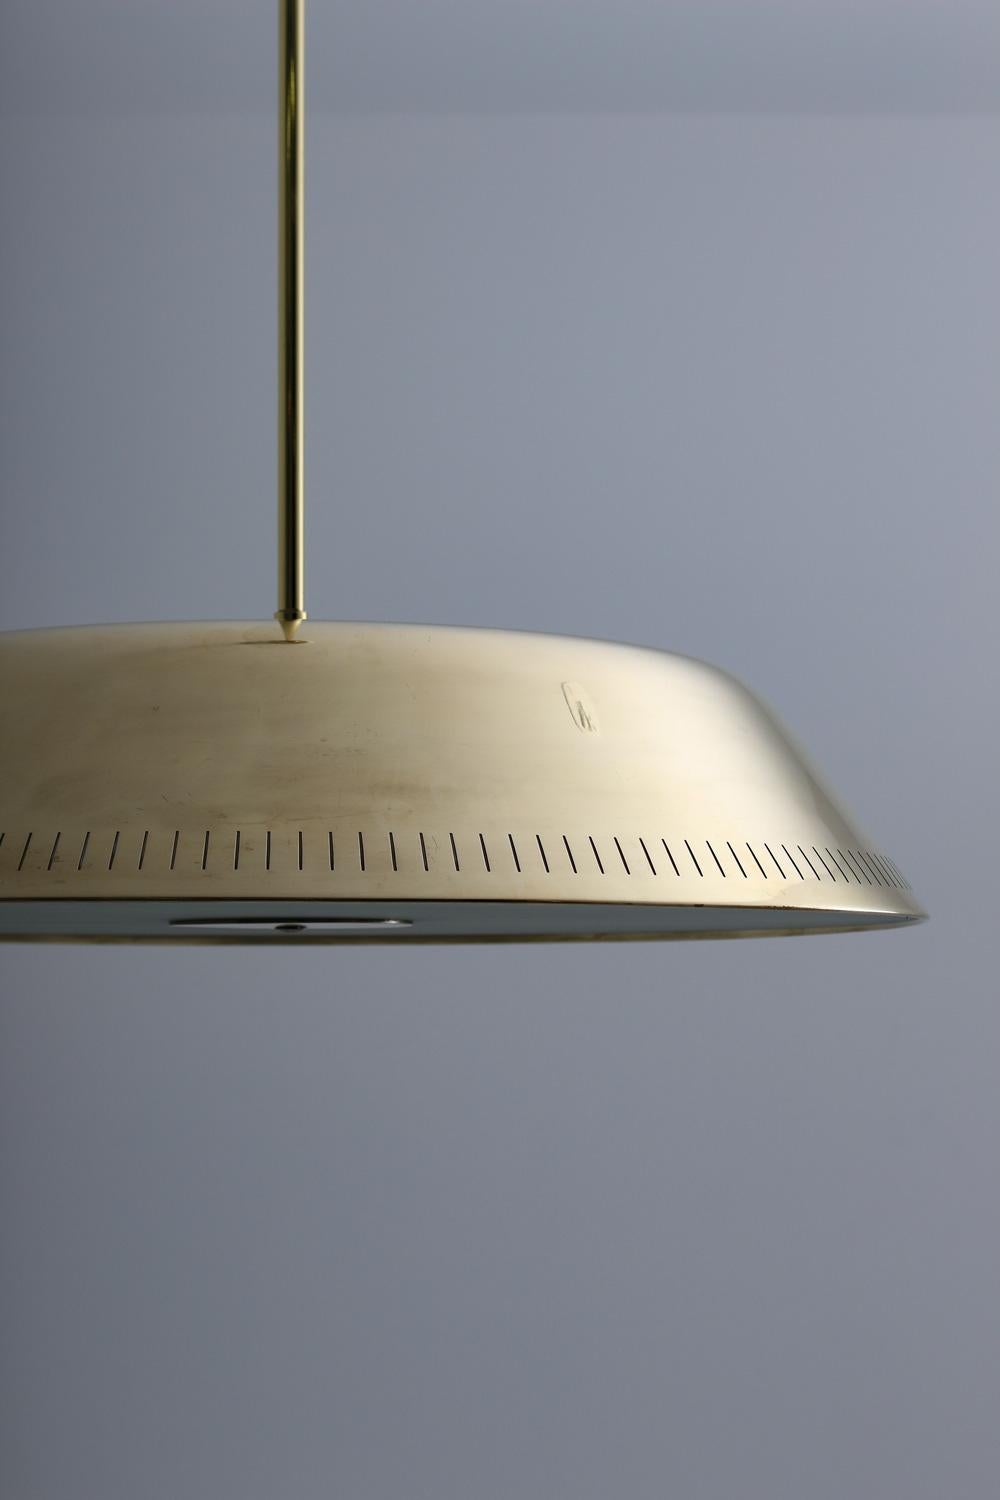 Pendant in frosted glass and brass by Harald Notini for Böhlmarks, Sweden, circa 1940
This large pendant features nine light sources; three uplights and six downlights. The bulbs are hidden by a frosted glass diffuser, held by a slim brass disc in